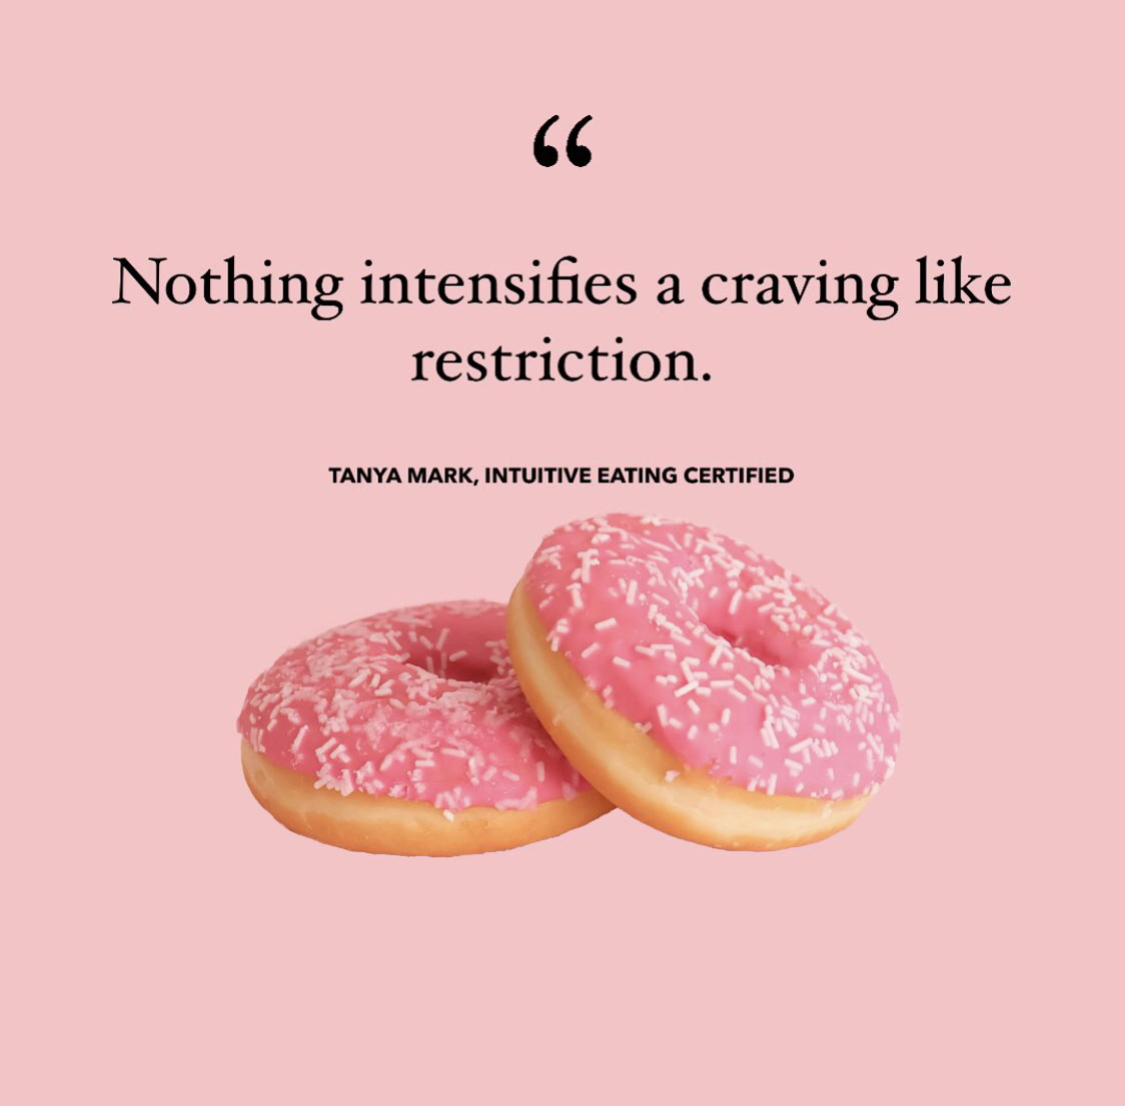 Learn to eat intuitively and beat sugar cravings